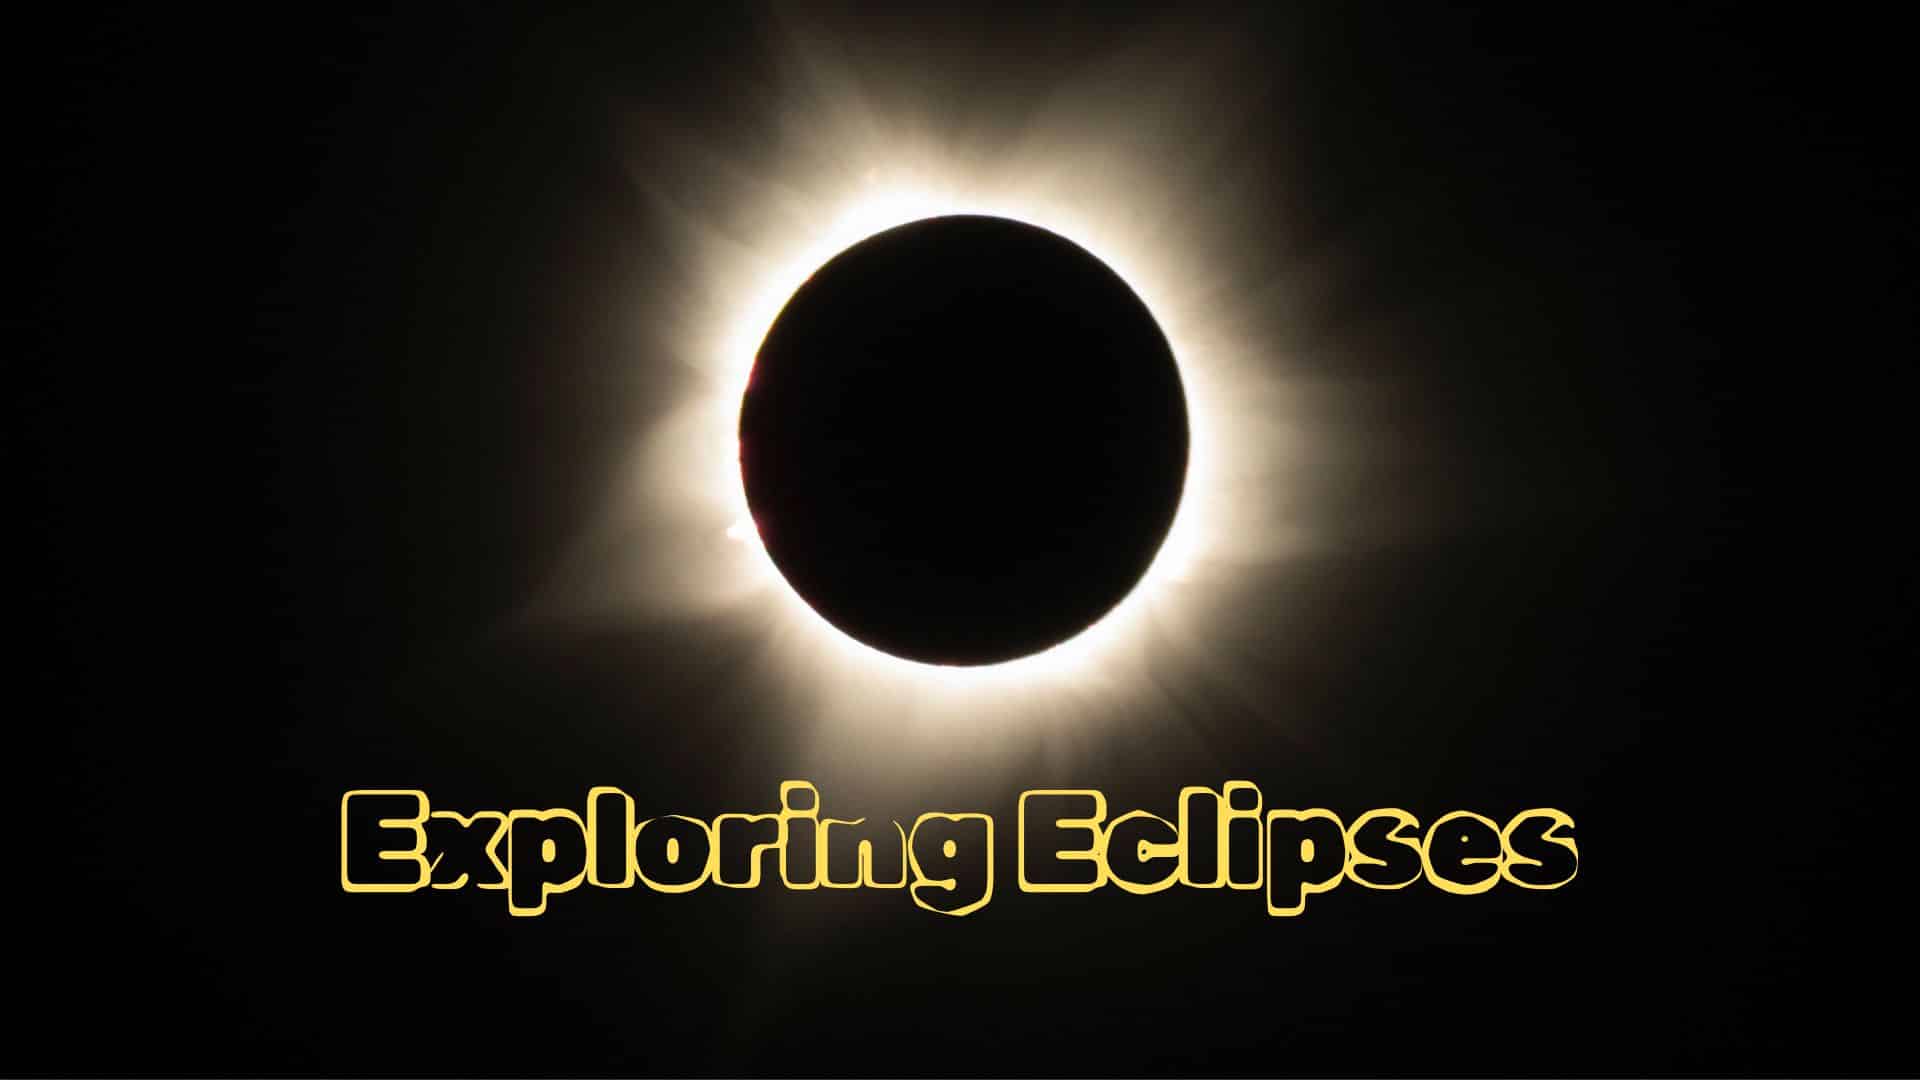 Photograph of a solar eclipse with a ring of light reaching out past the circular silhouette of the moon. Yellow text says Exploring Eclipses.